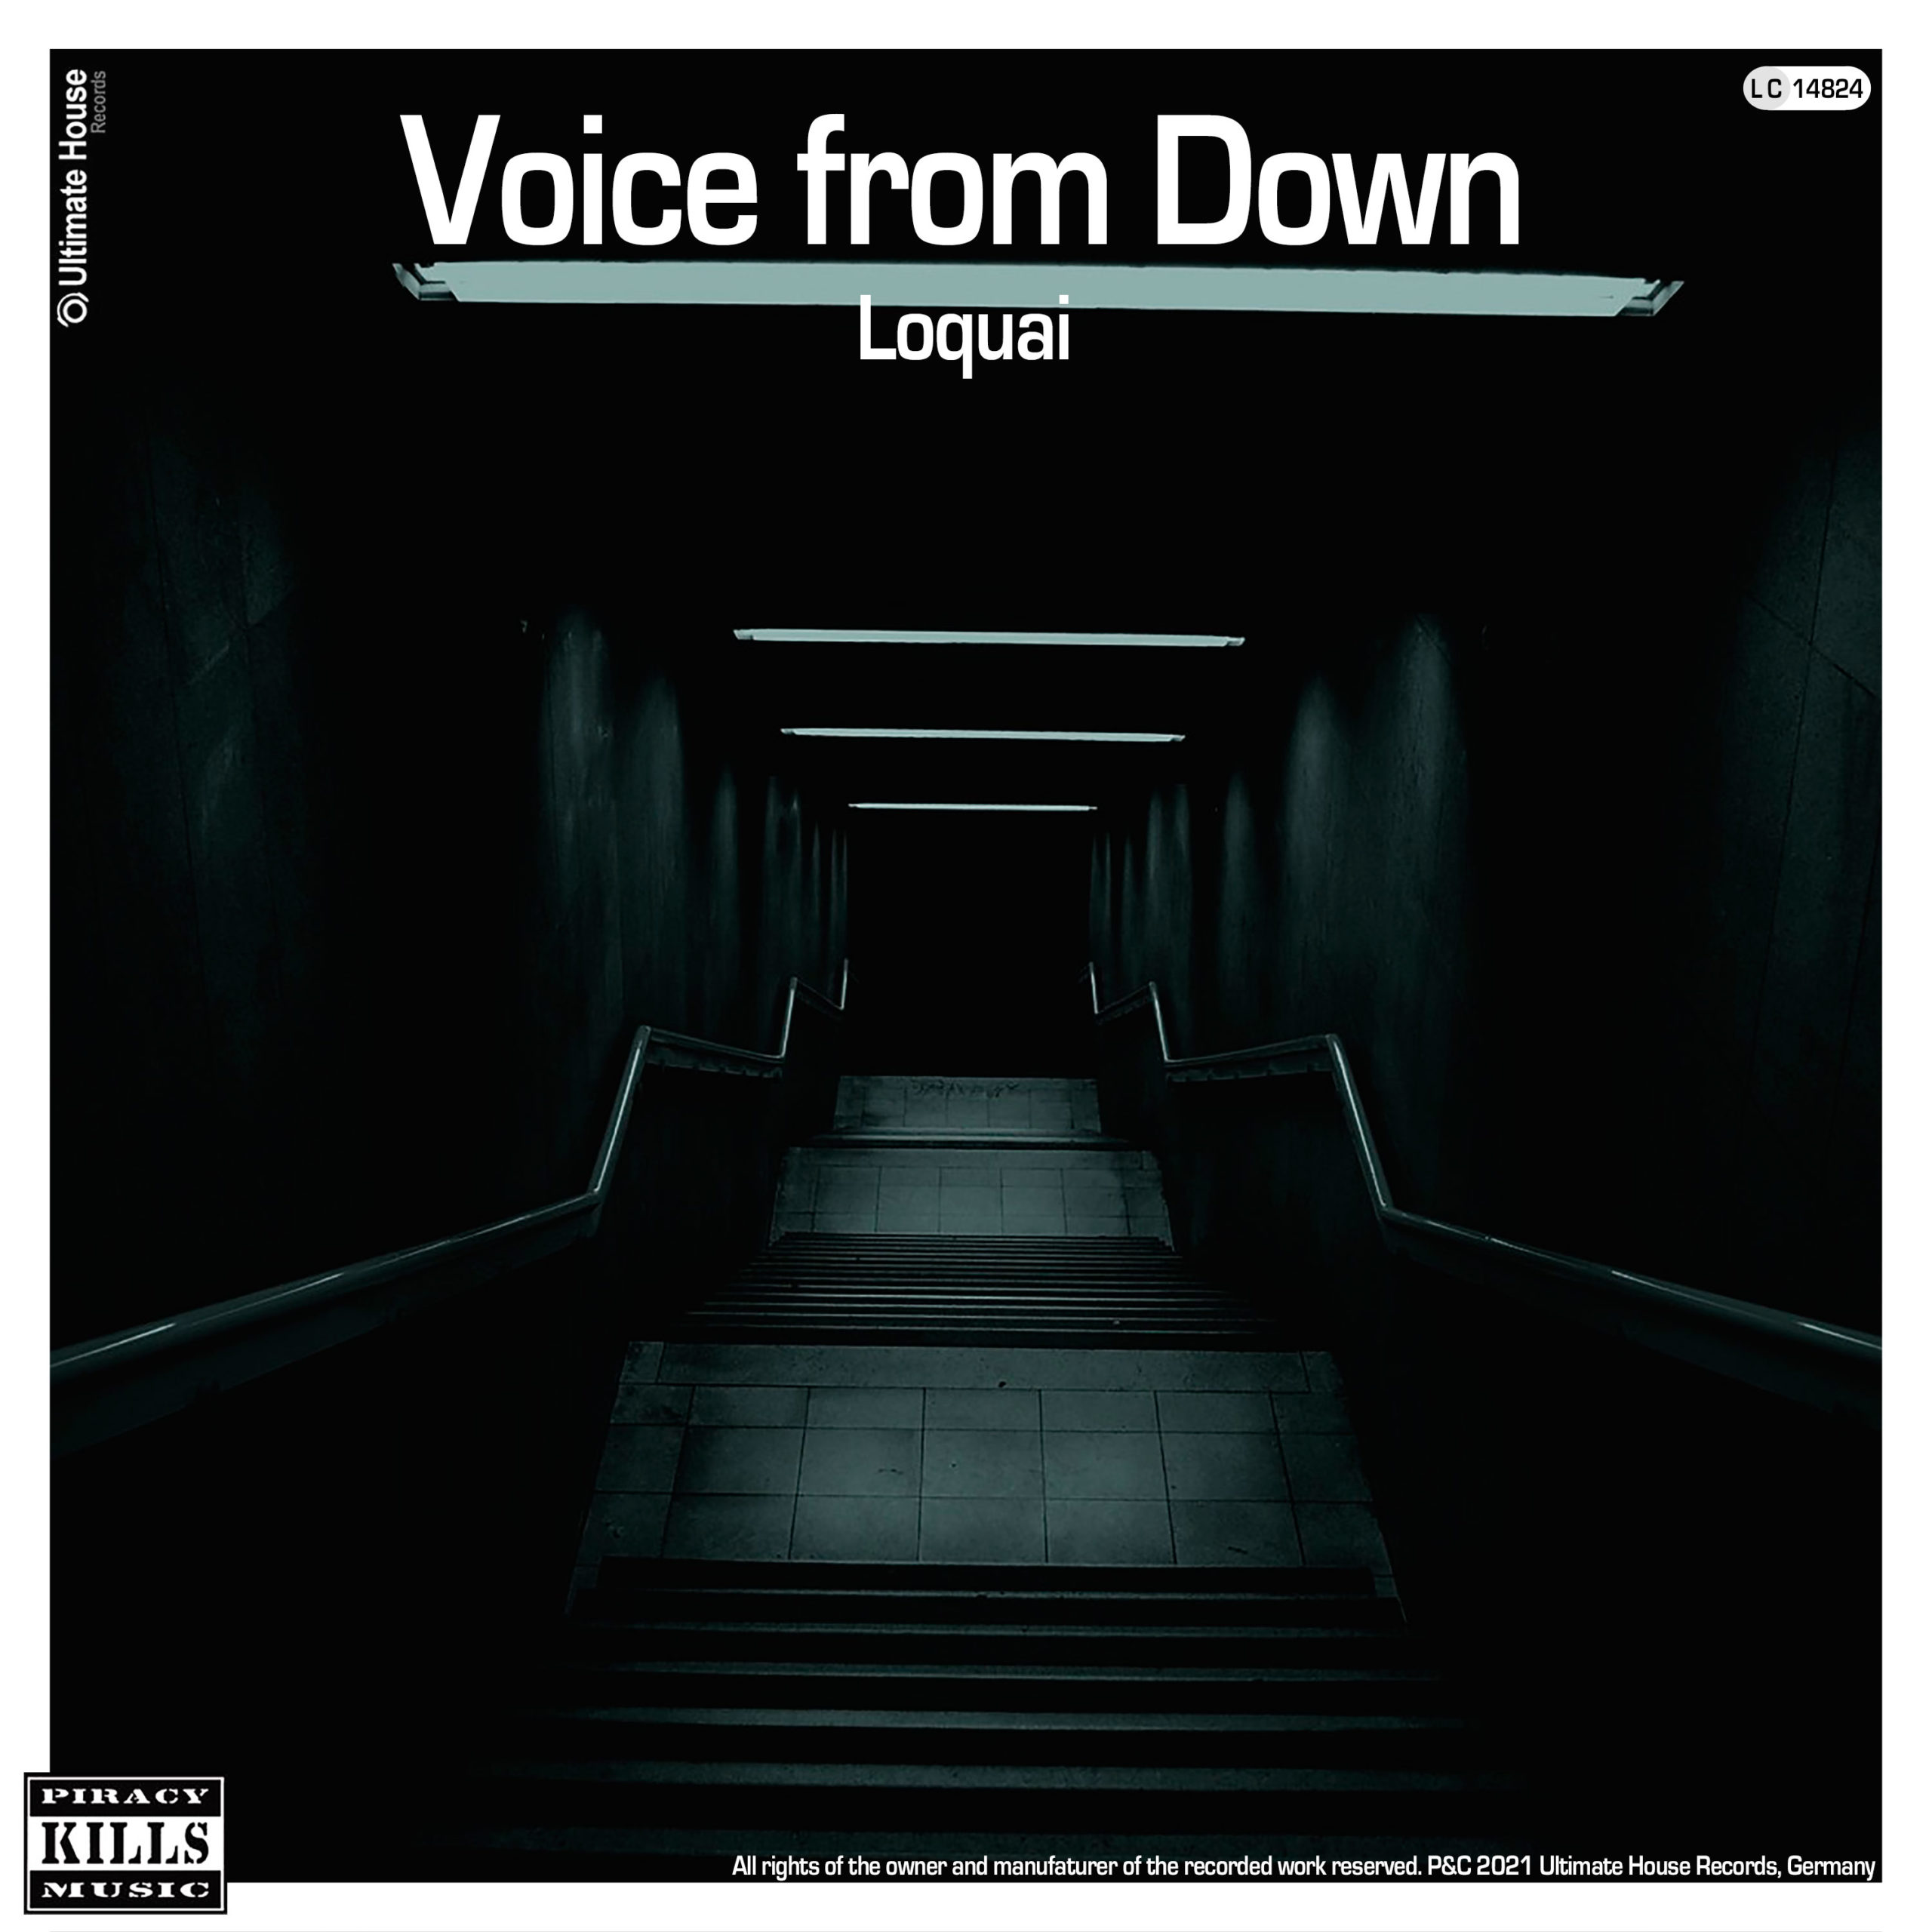 https://www.ultimate-house-records.com/wp-content/uploads/2021/10/154-Voice_from_Down-Cover_3000px_web-scaled.jpg